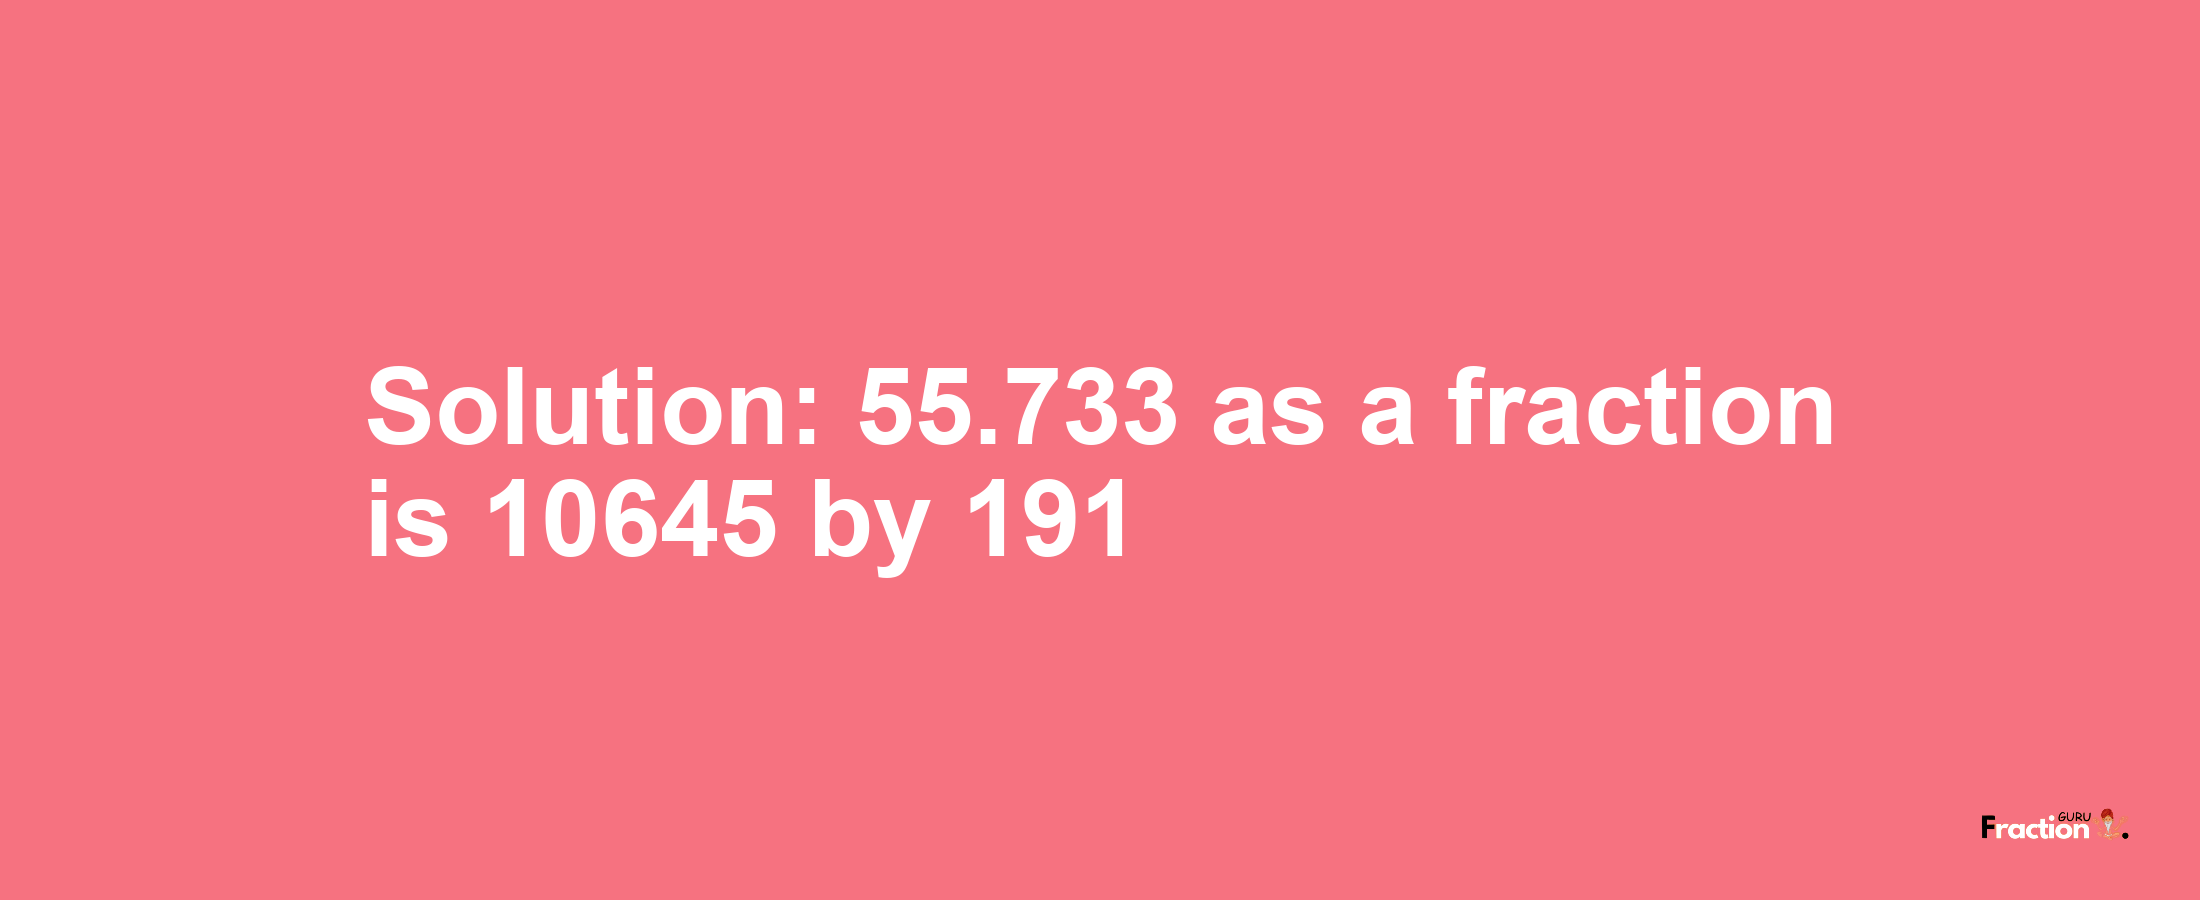 Solution:55.733 as a fraction is 10645/191